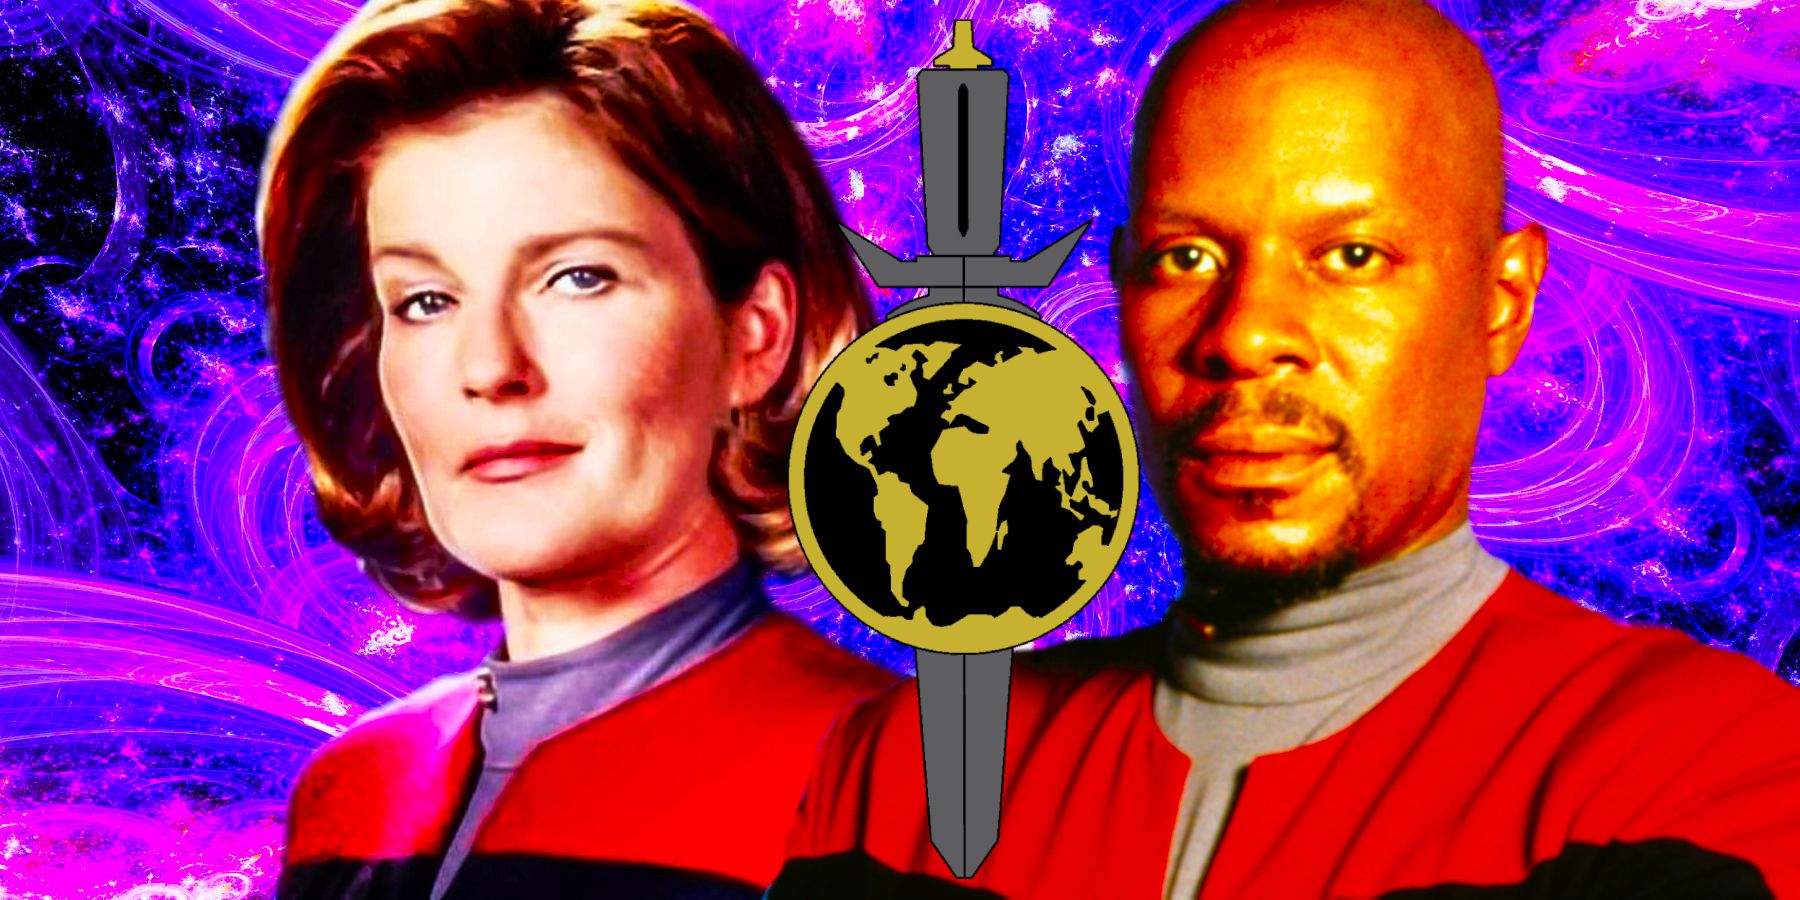 Kate Mulgrew as Kathryn Janeway and Avery Brooks as Captain Sisko from Star Trek, with a Terran Empire insignia between them